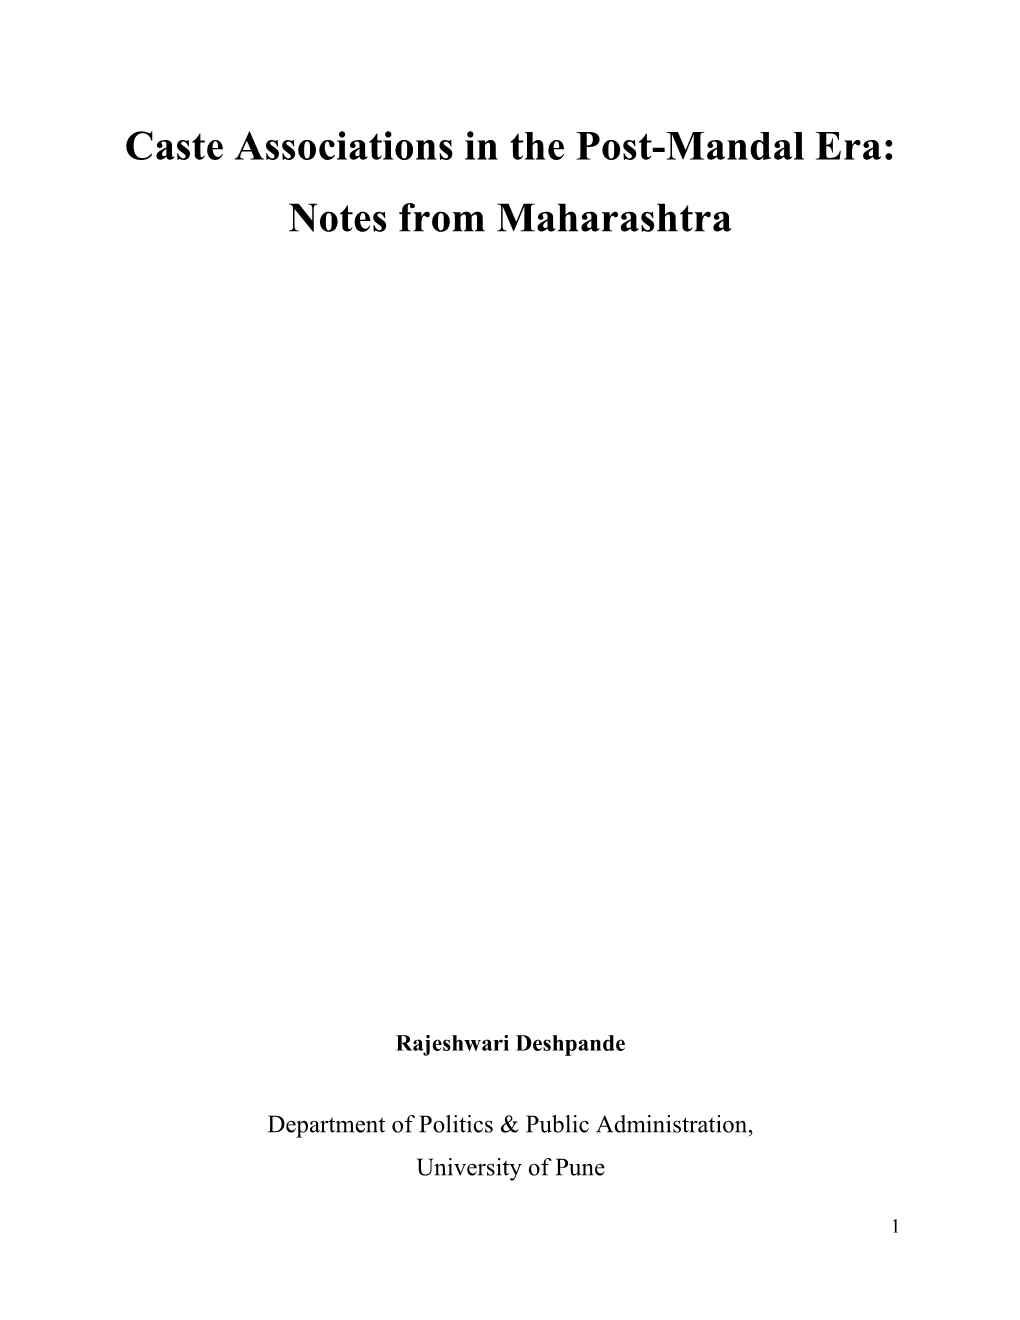 Caste Associations in the Post-Mandal Era: Notes from Maharashtra